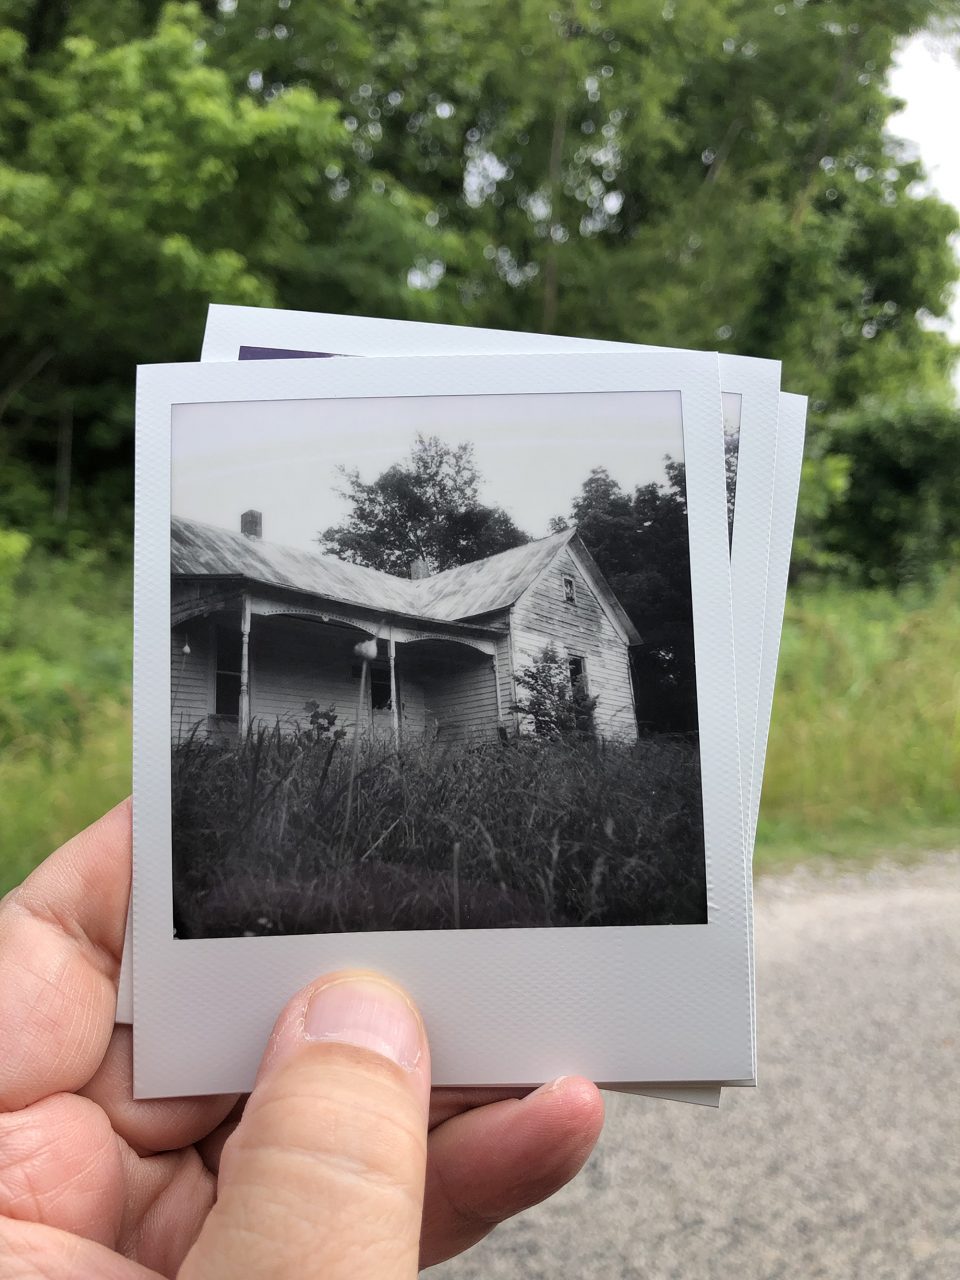 Here we can see a black and white Polaroid photograph of the same old farmhouse shown before.